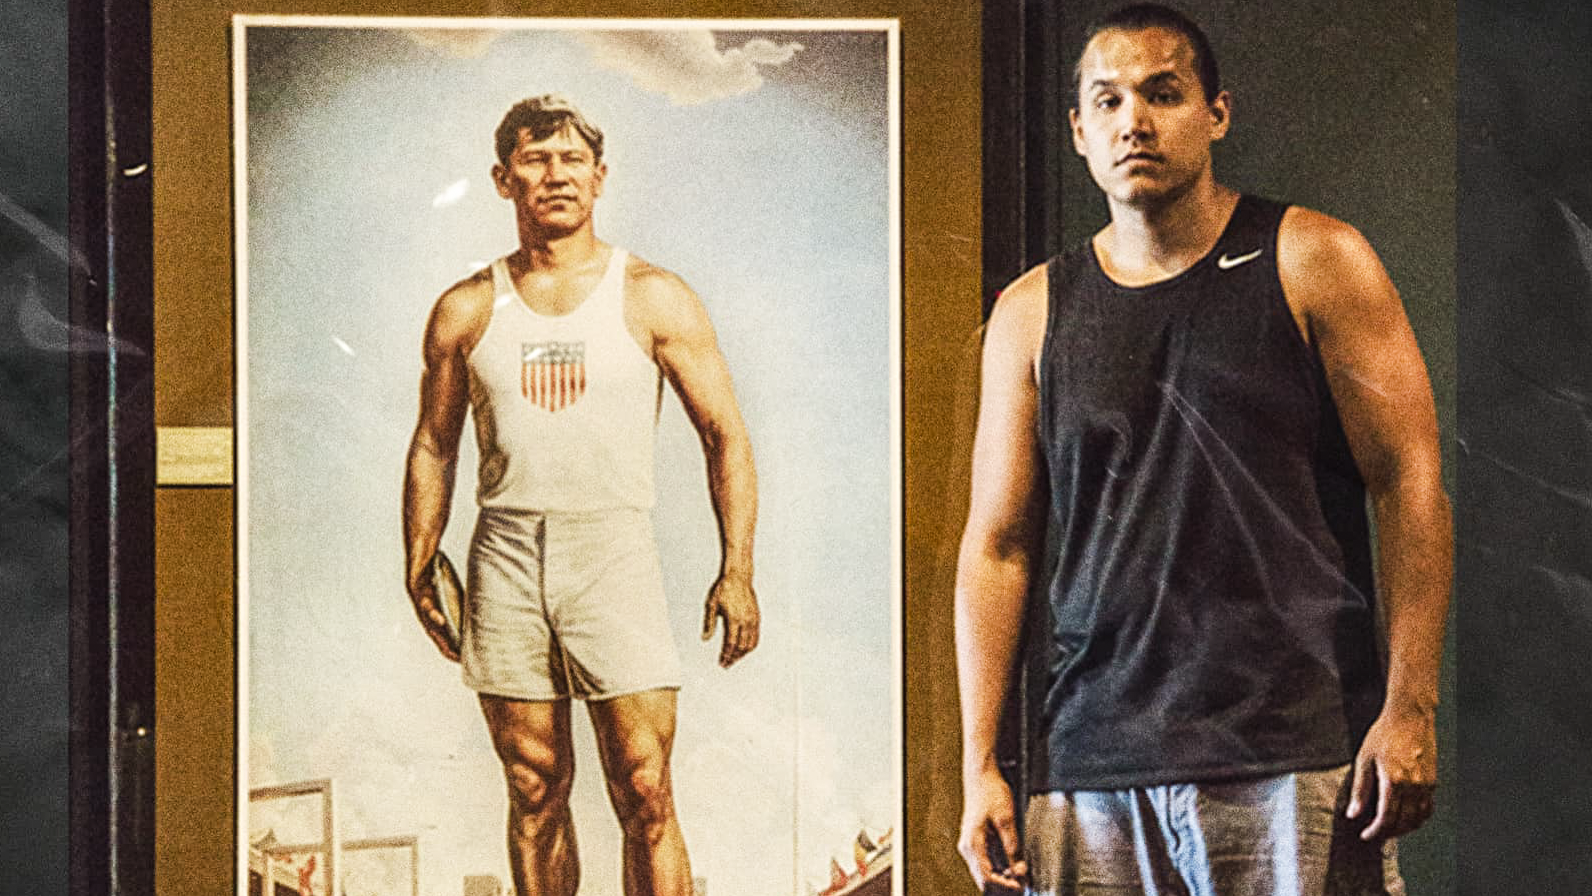 Tall Paul alongside a portrait of athlete Jim Thorpe, on the cover of his album "The Story of Jim Thorpe"